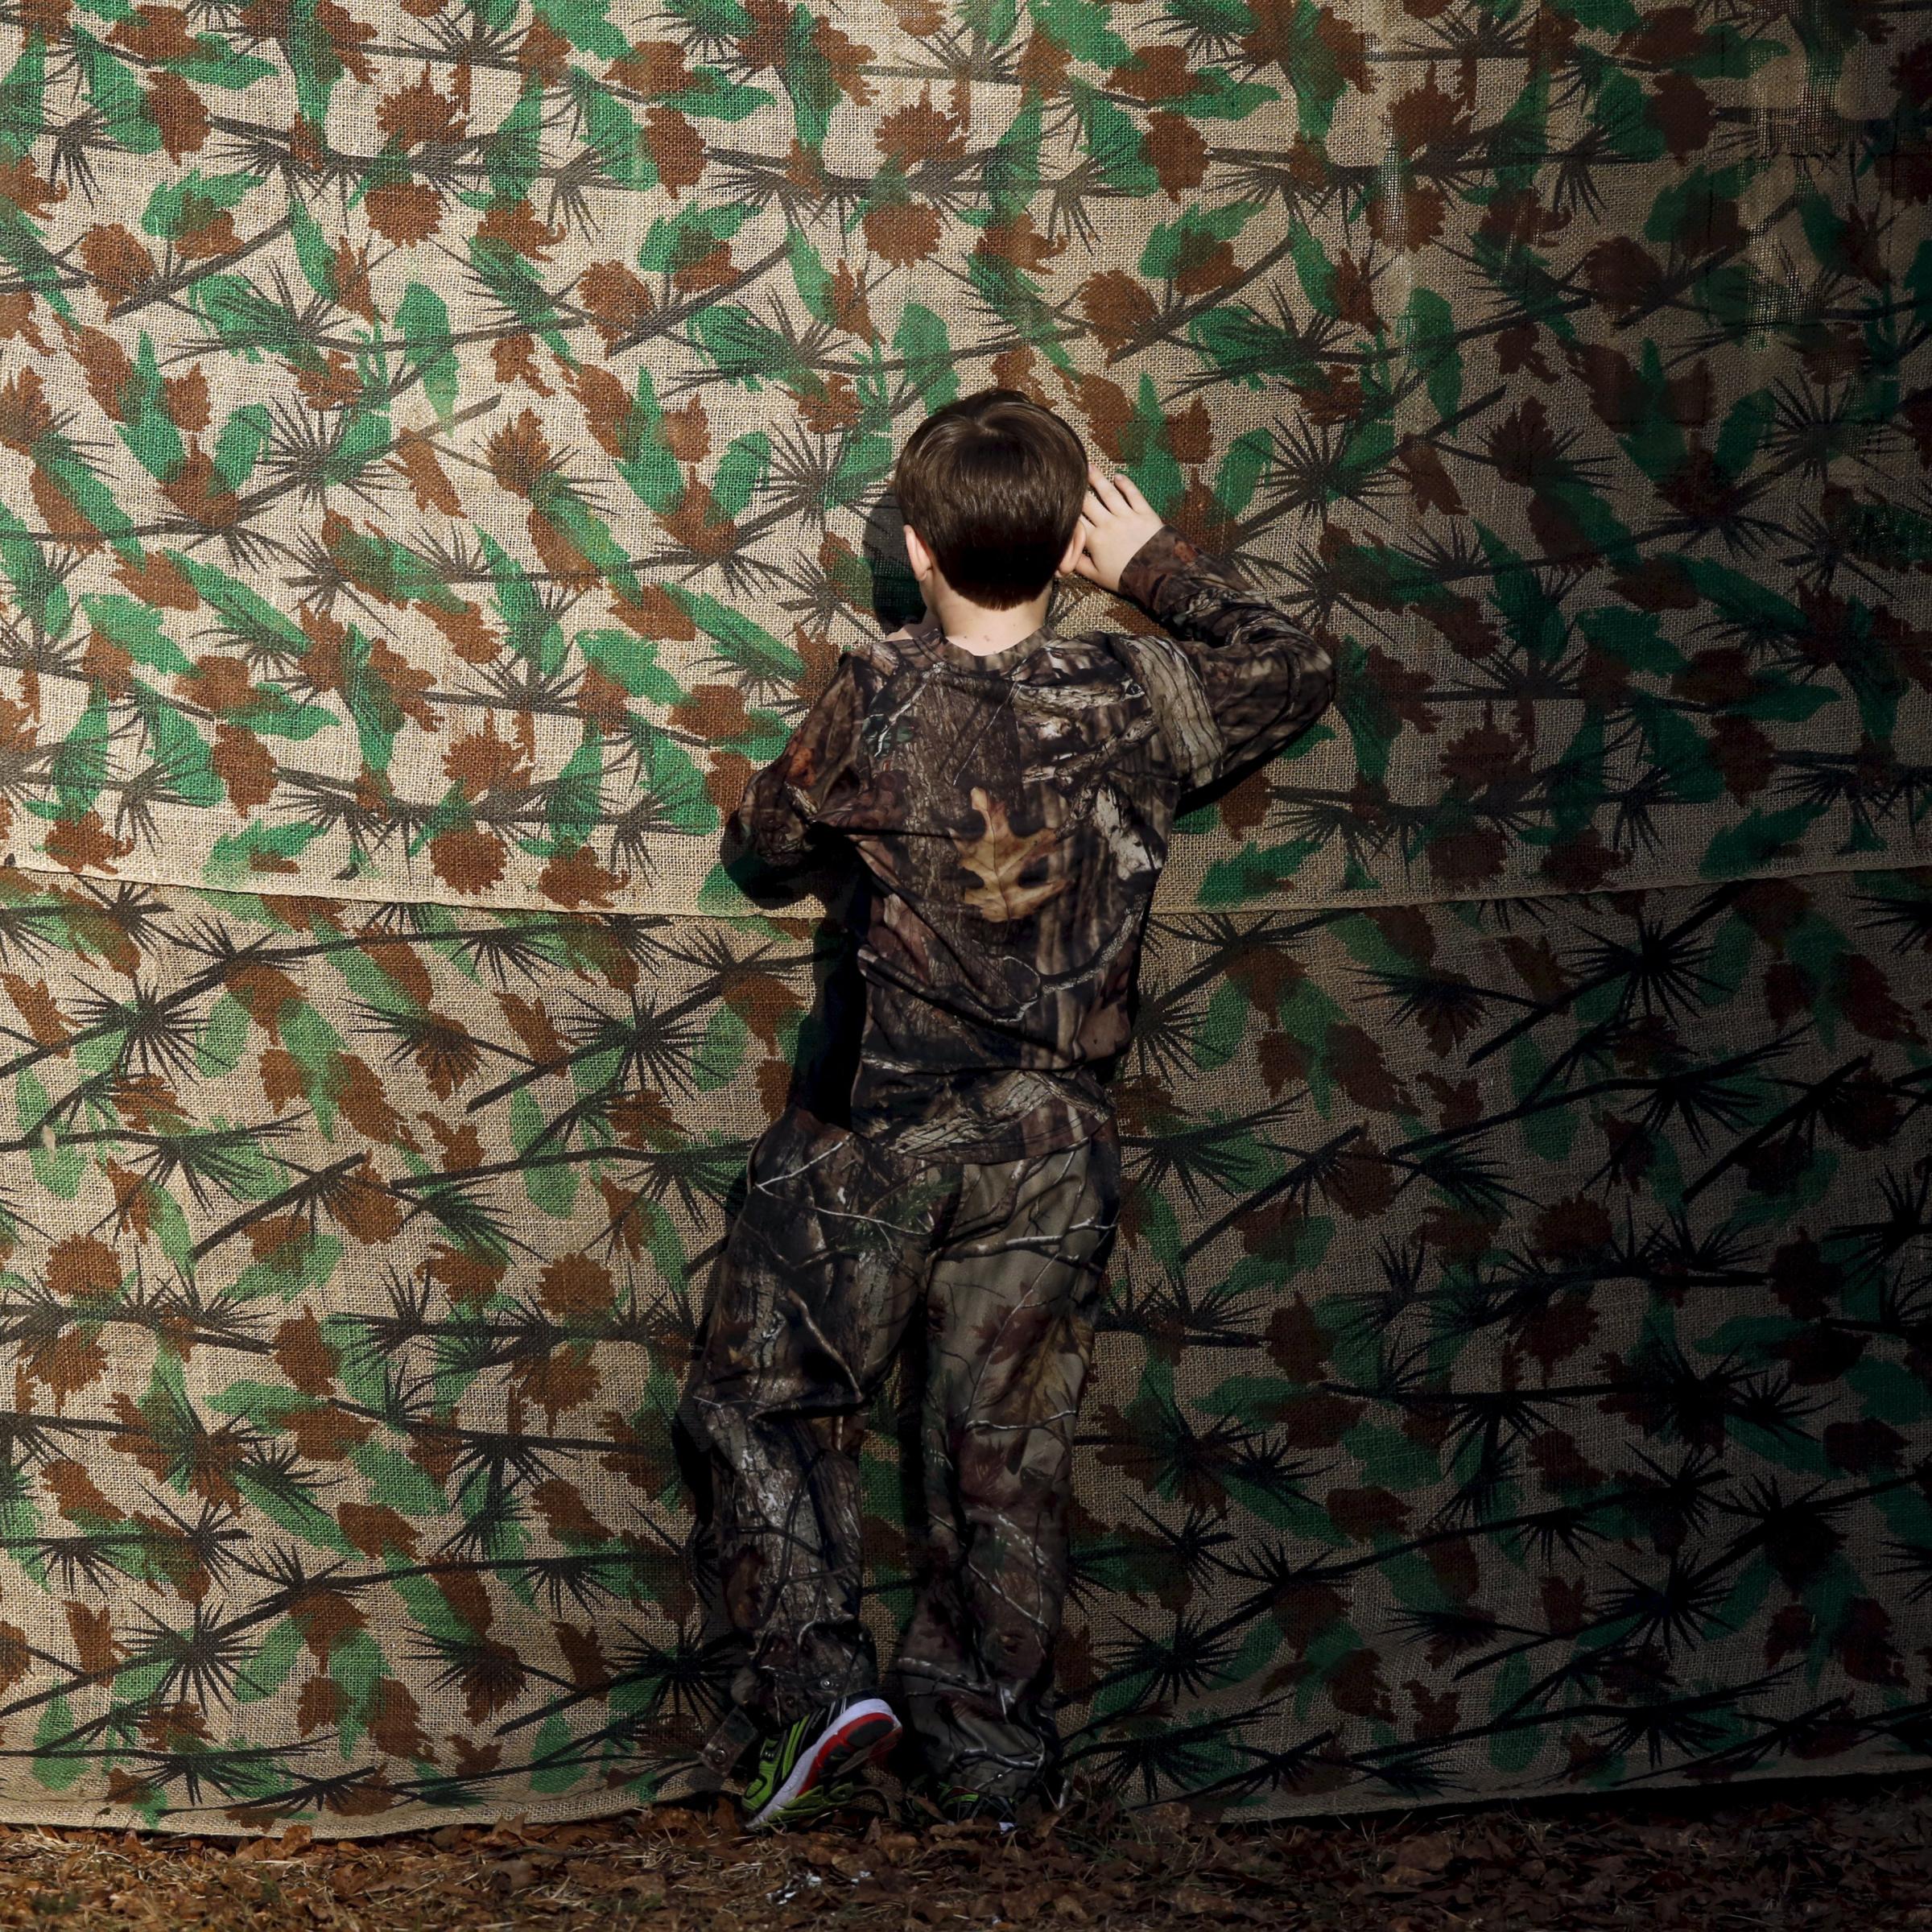 A young boy in camouflage clothing looks through a cloth backdrop to get a glimpse of U.S. Republican presidential candidate Donald Trump at a rally in Walterboro, S.C. on Feb. 17, 2016.